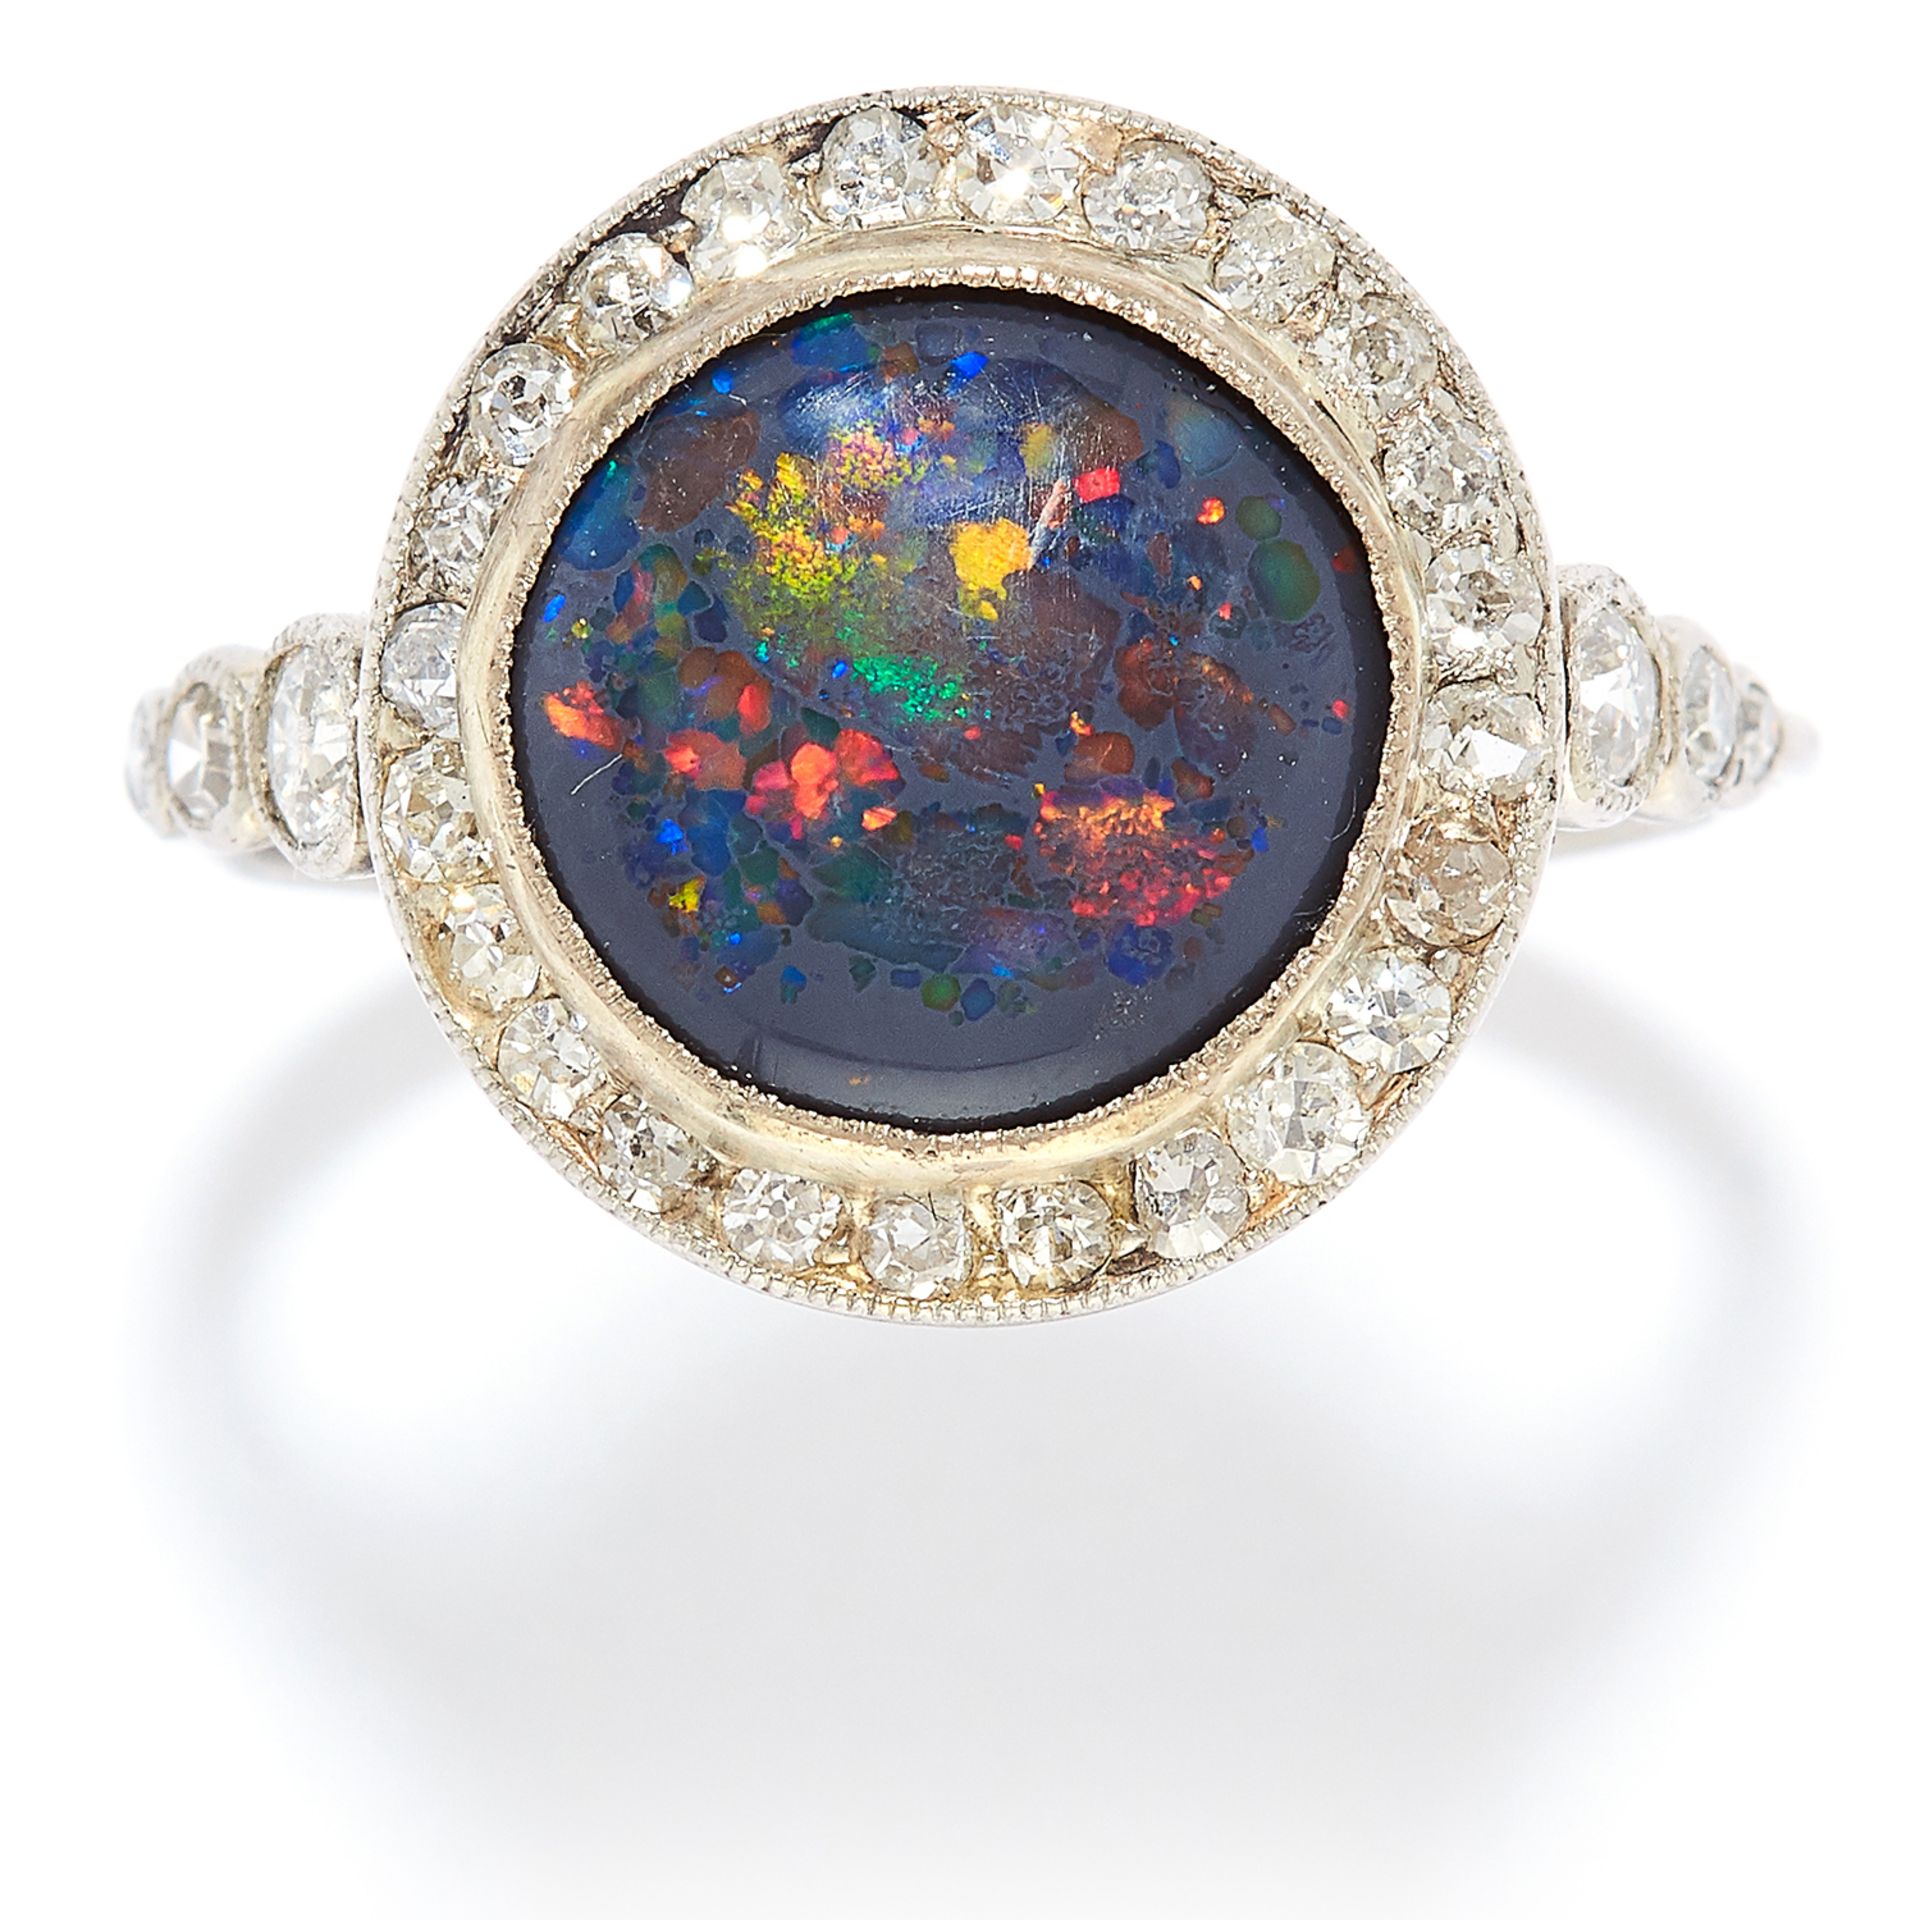 BLACK OPAL AND DIAMOND RING in white gold or platinum, set with a cabochon black opal of